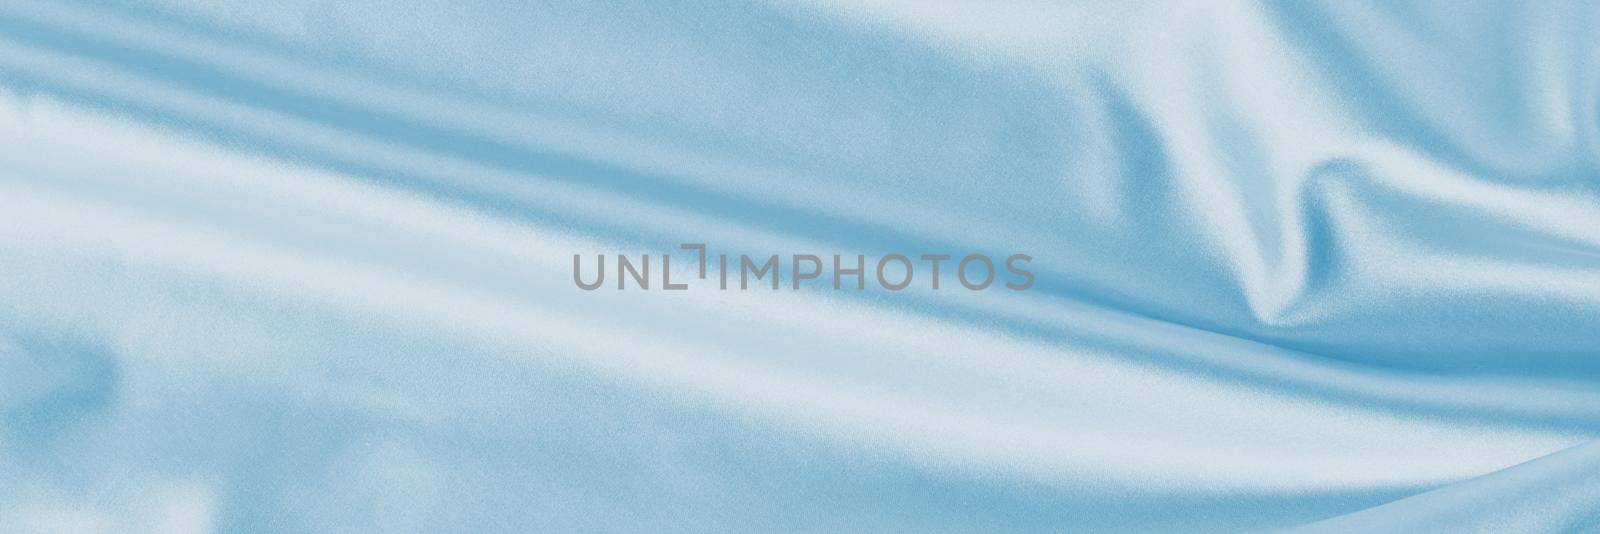 Light blue silk background with folds. Abstract texture of rippled satin surface, long banner